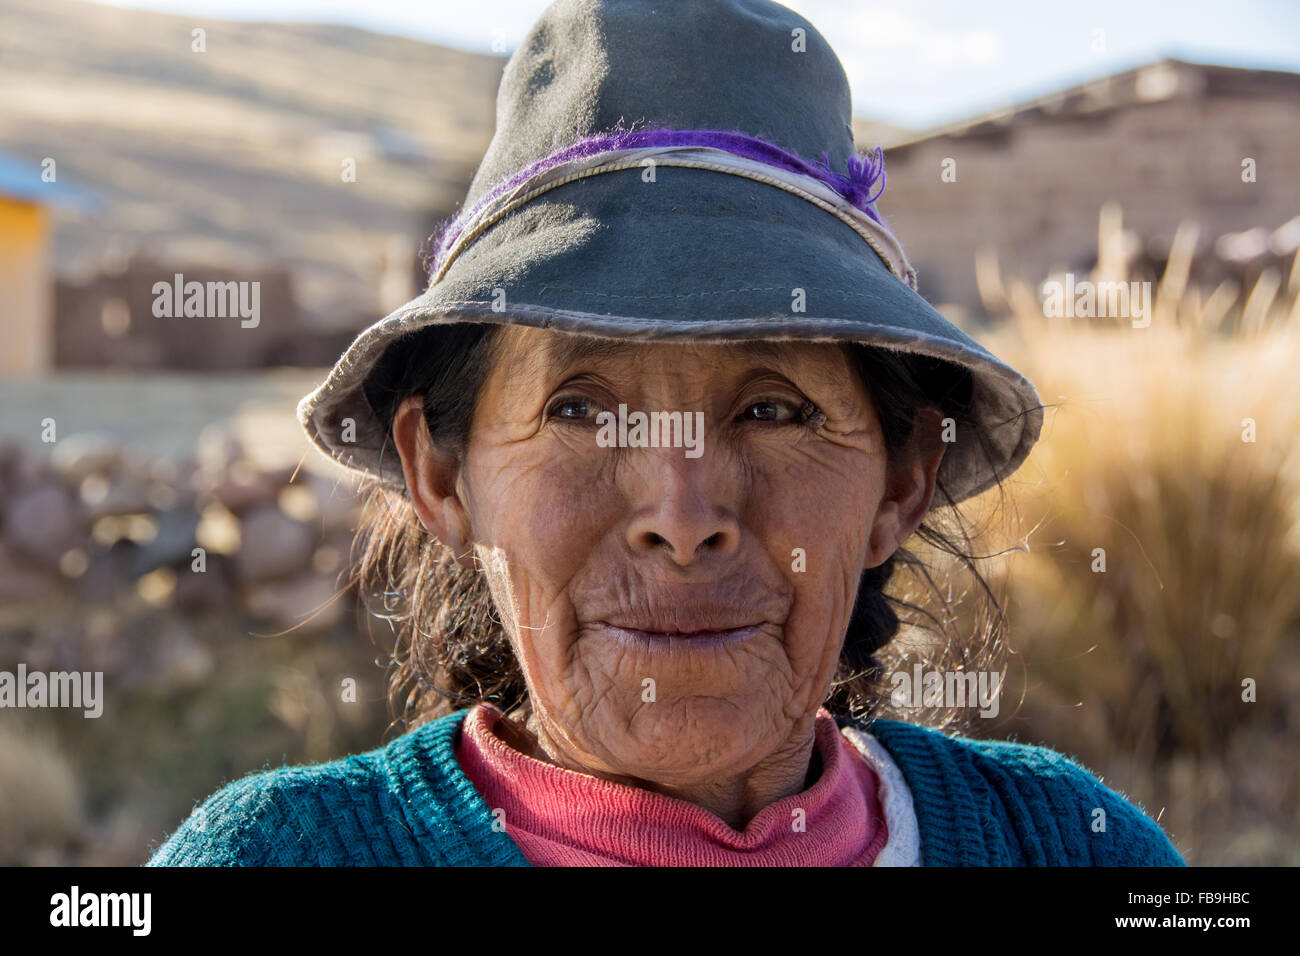 Indigenous woman with hat, Cusco, Peru Stock Photo